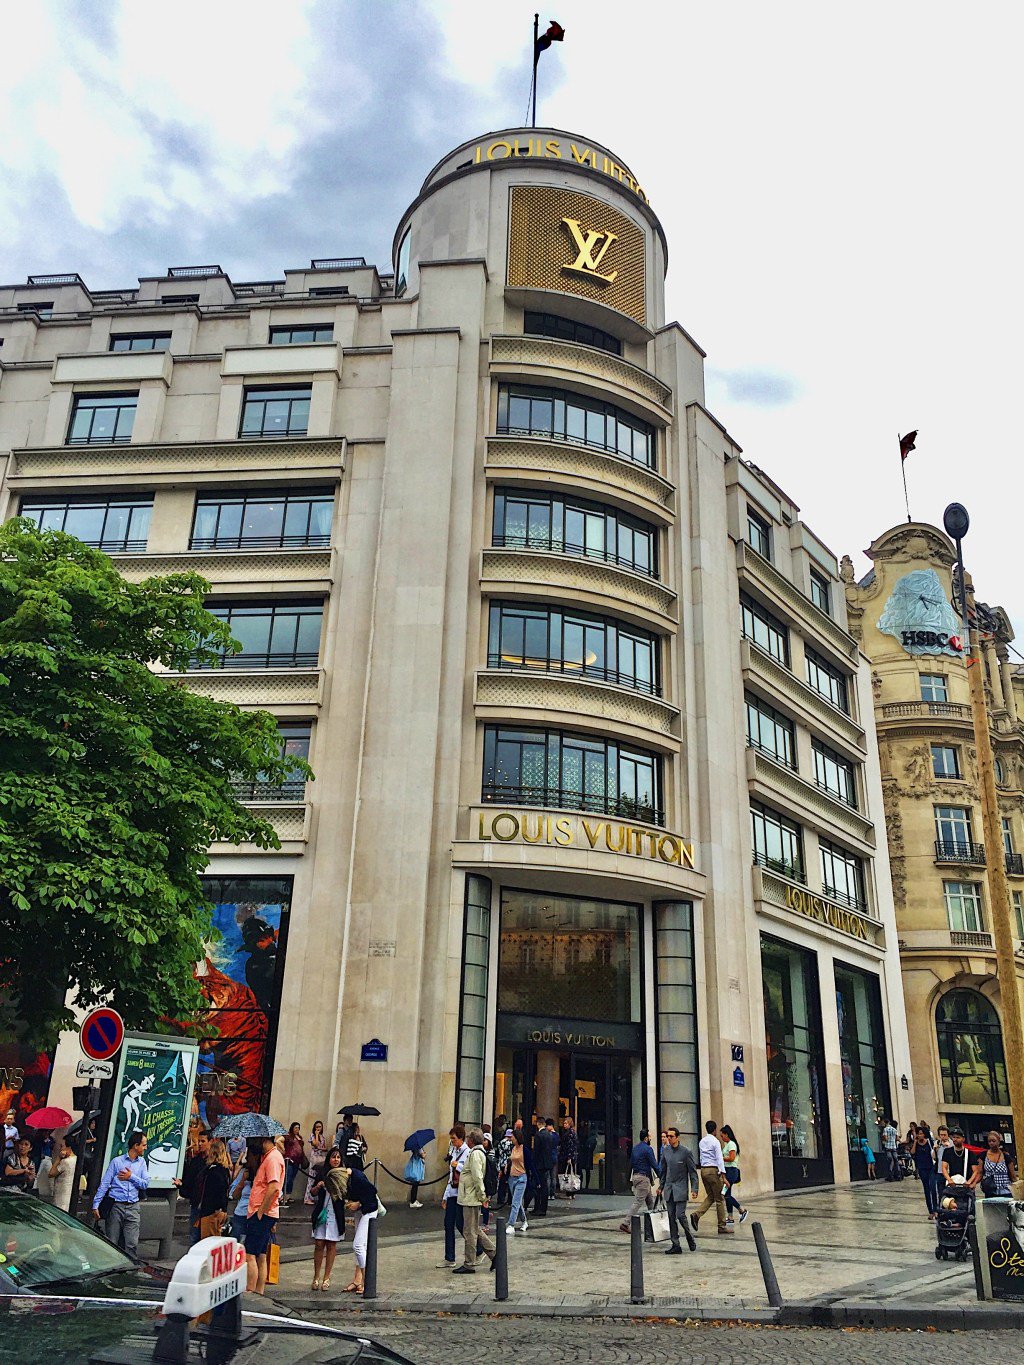 Visit the Louis Vuitton on the Champs Elysees which was